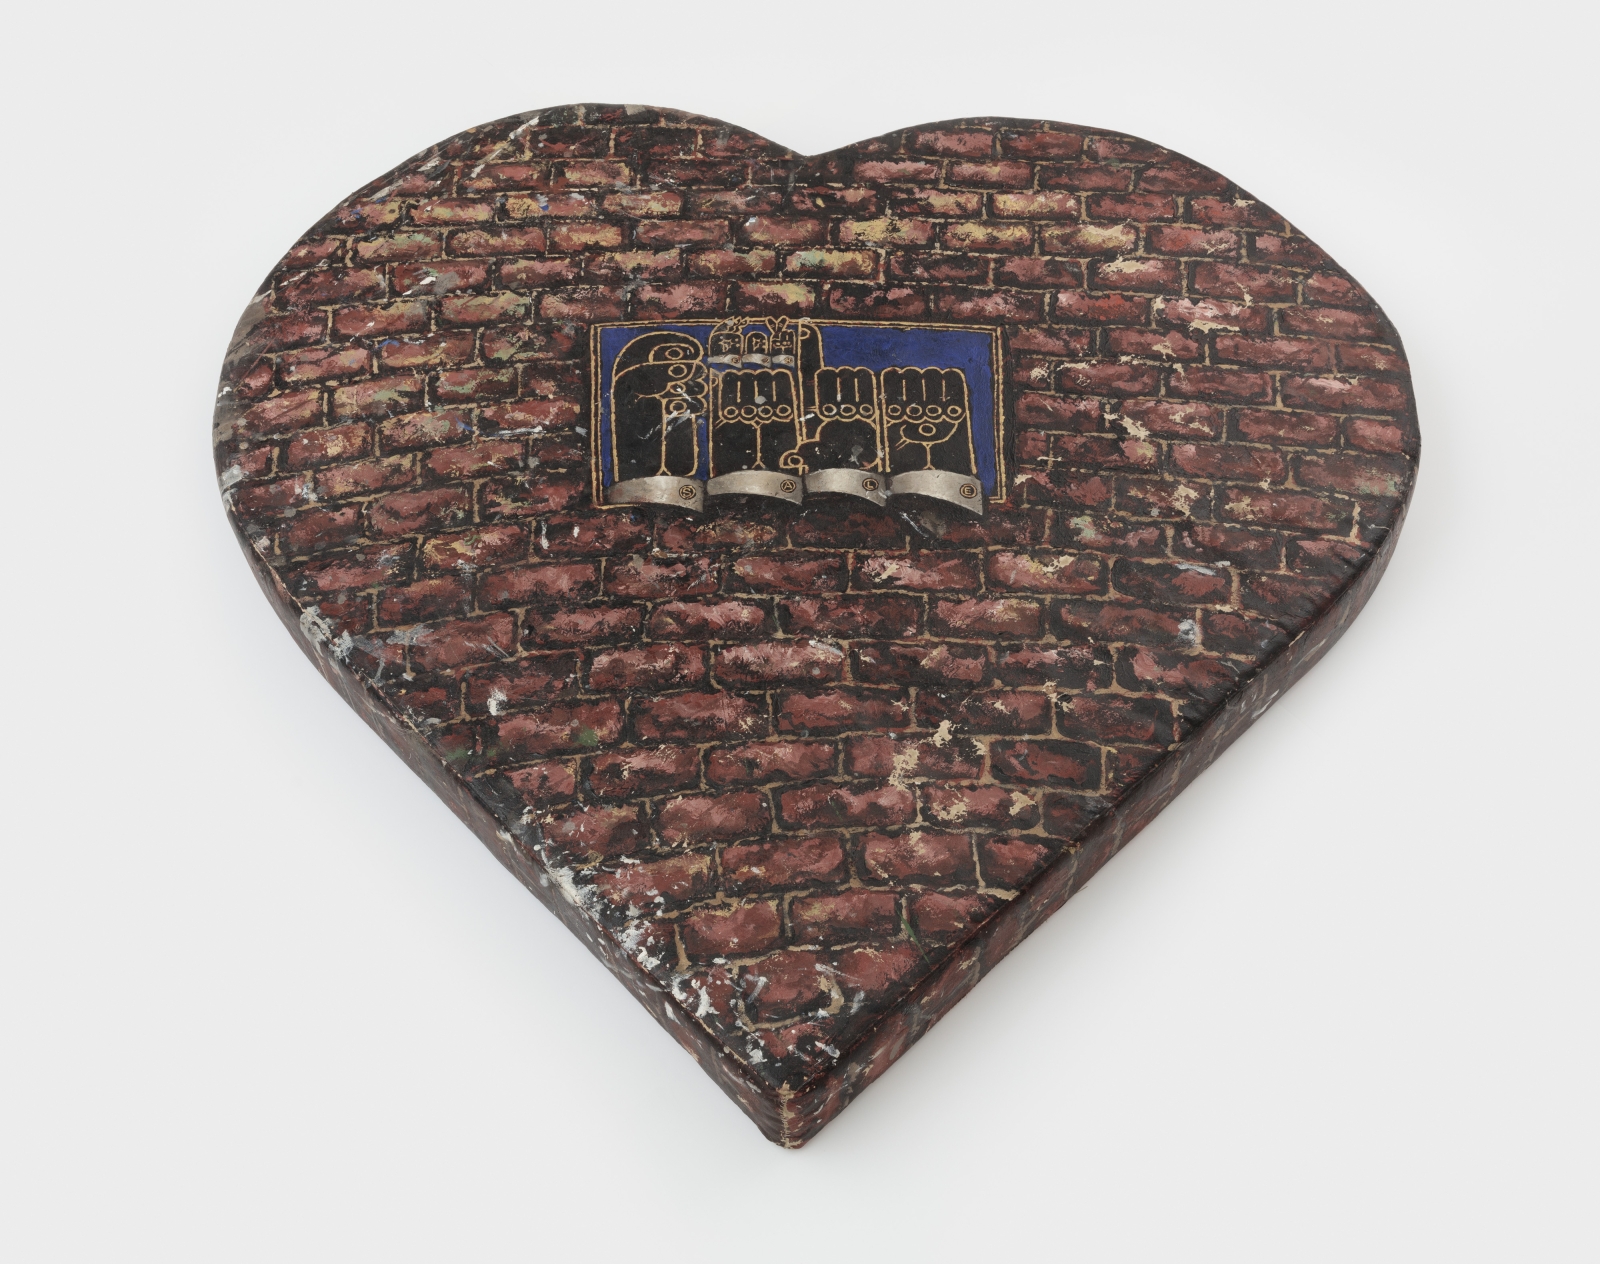 Martin Wong
Untitled, c. 1986
heart-shaped pillow sculpture, acrylic on canvas, stuffing
66 7/8 x 6 1/4 x 64 3/4 ins.
170 x 15.9 x 164.6 cm